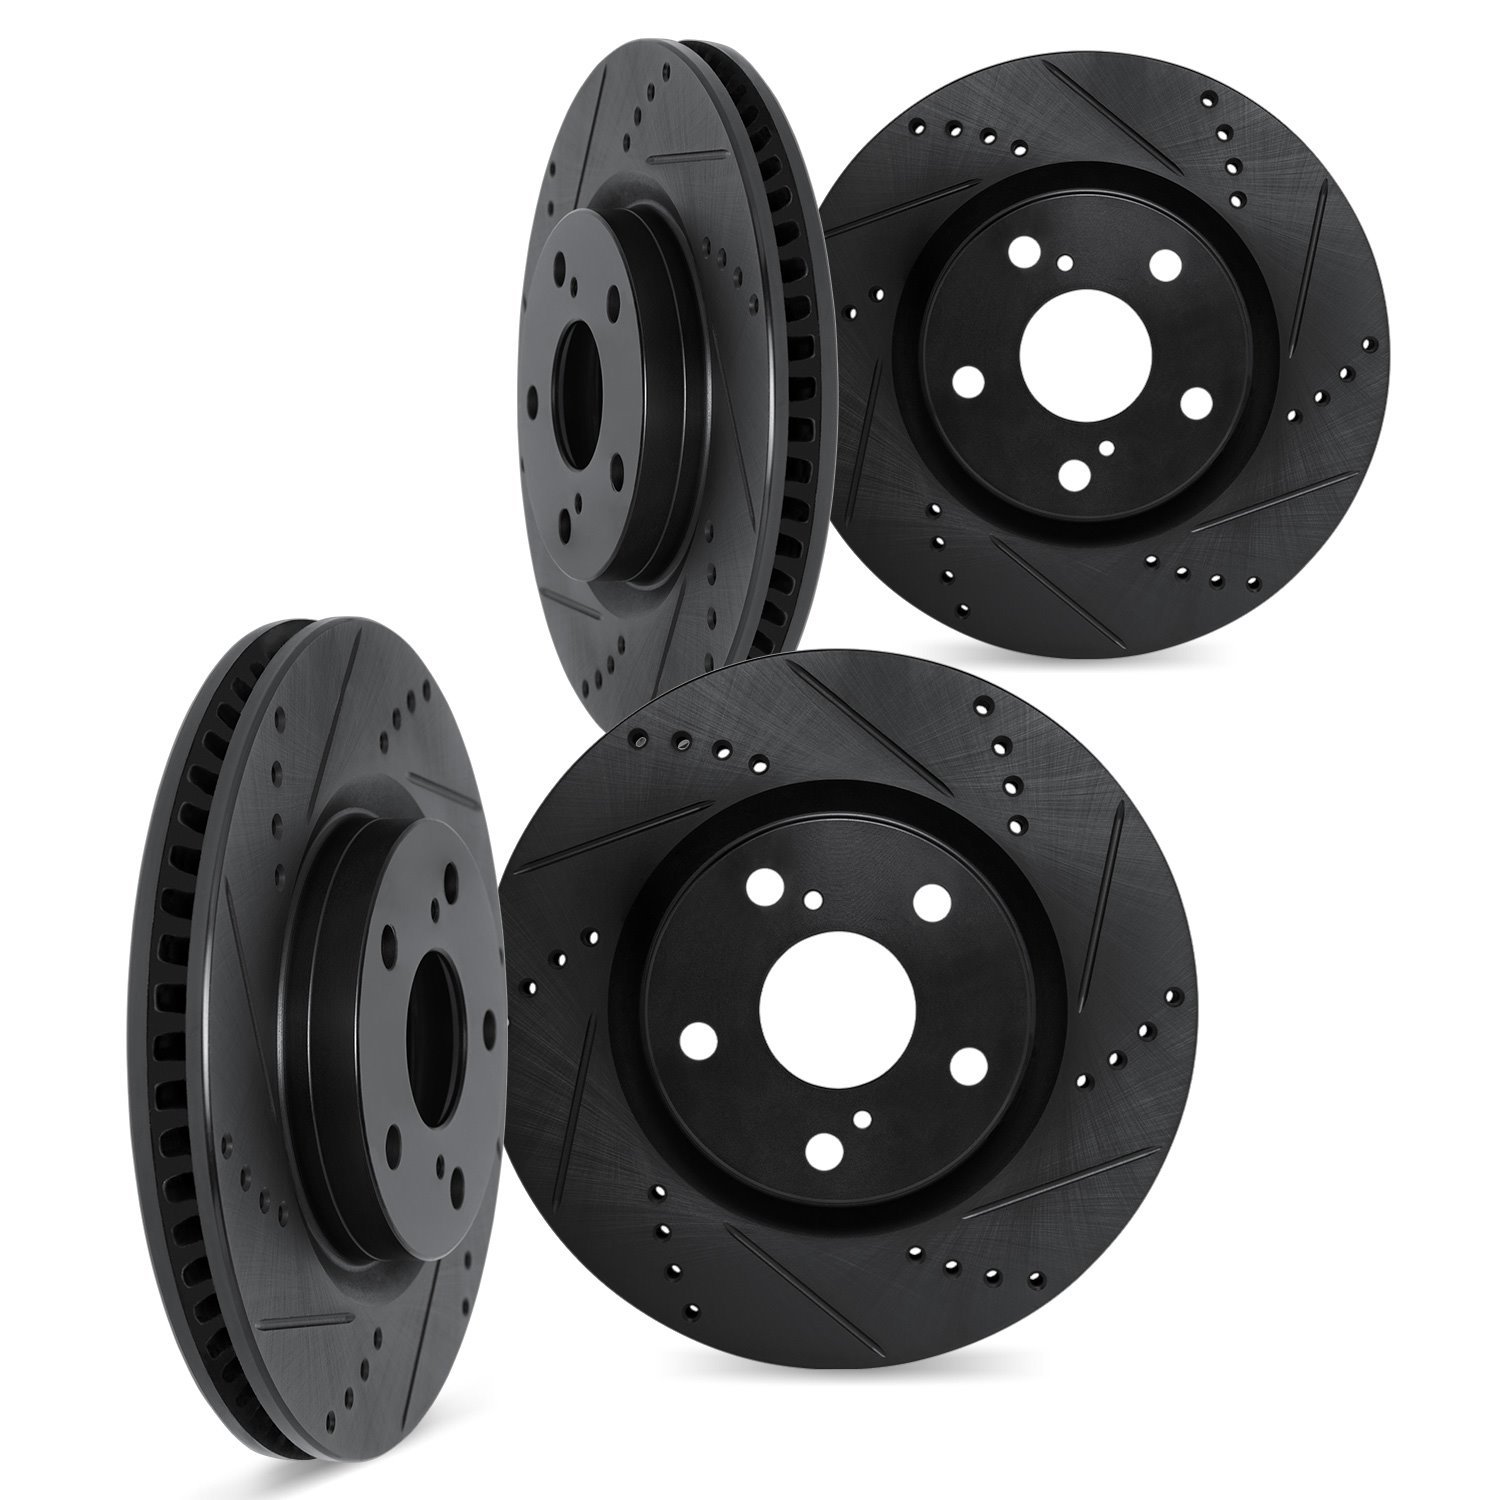 8004-75026 Drilled/Slotted Brake Rotors [Black], Fits Select Lexus/Toyota/Scion, Position: Front and Rear